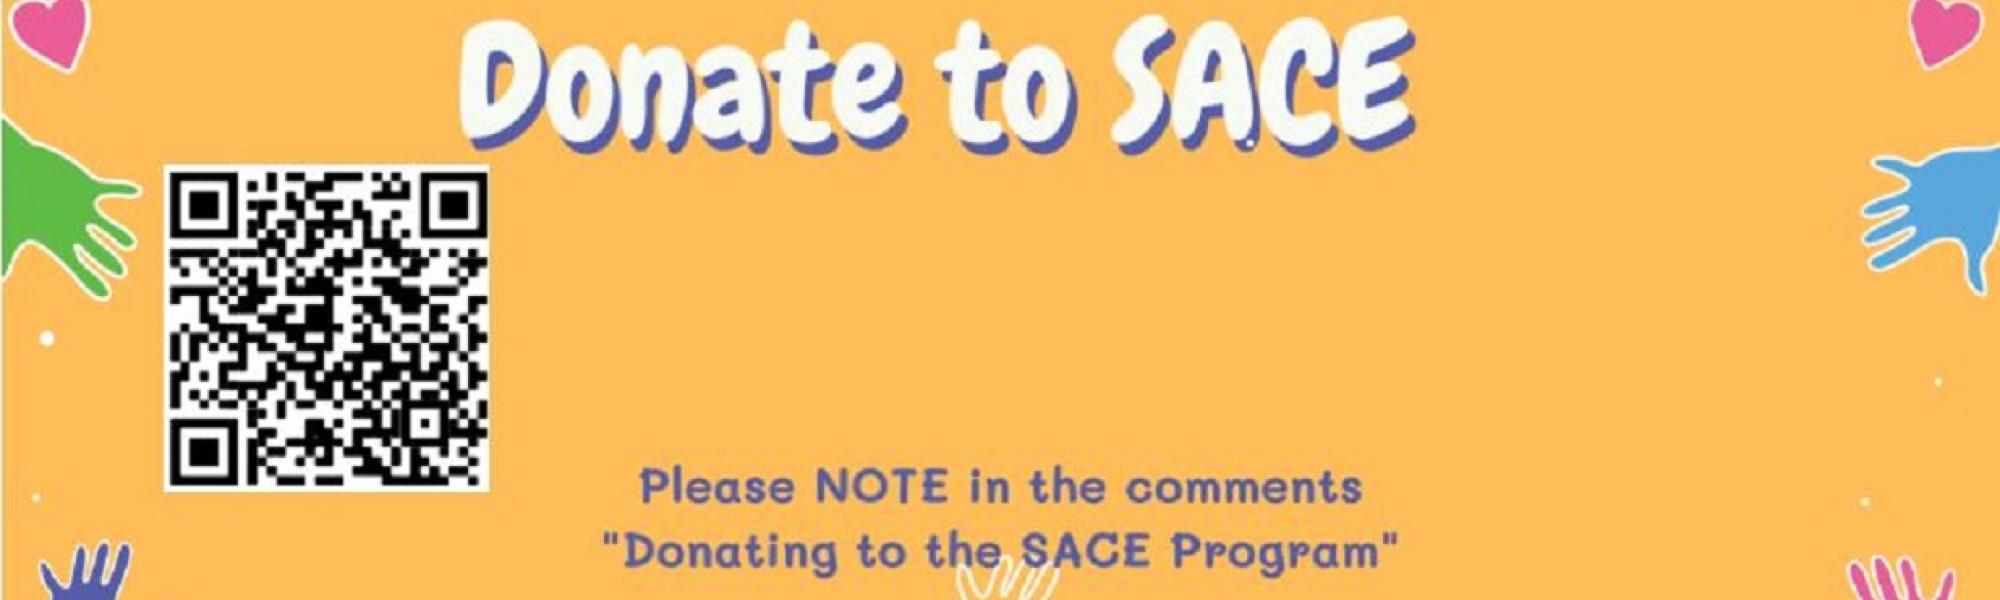 SACE Donation Graphic 04-24